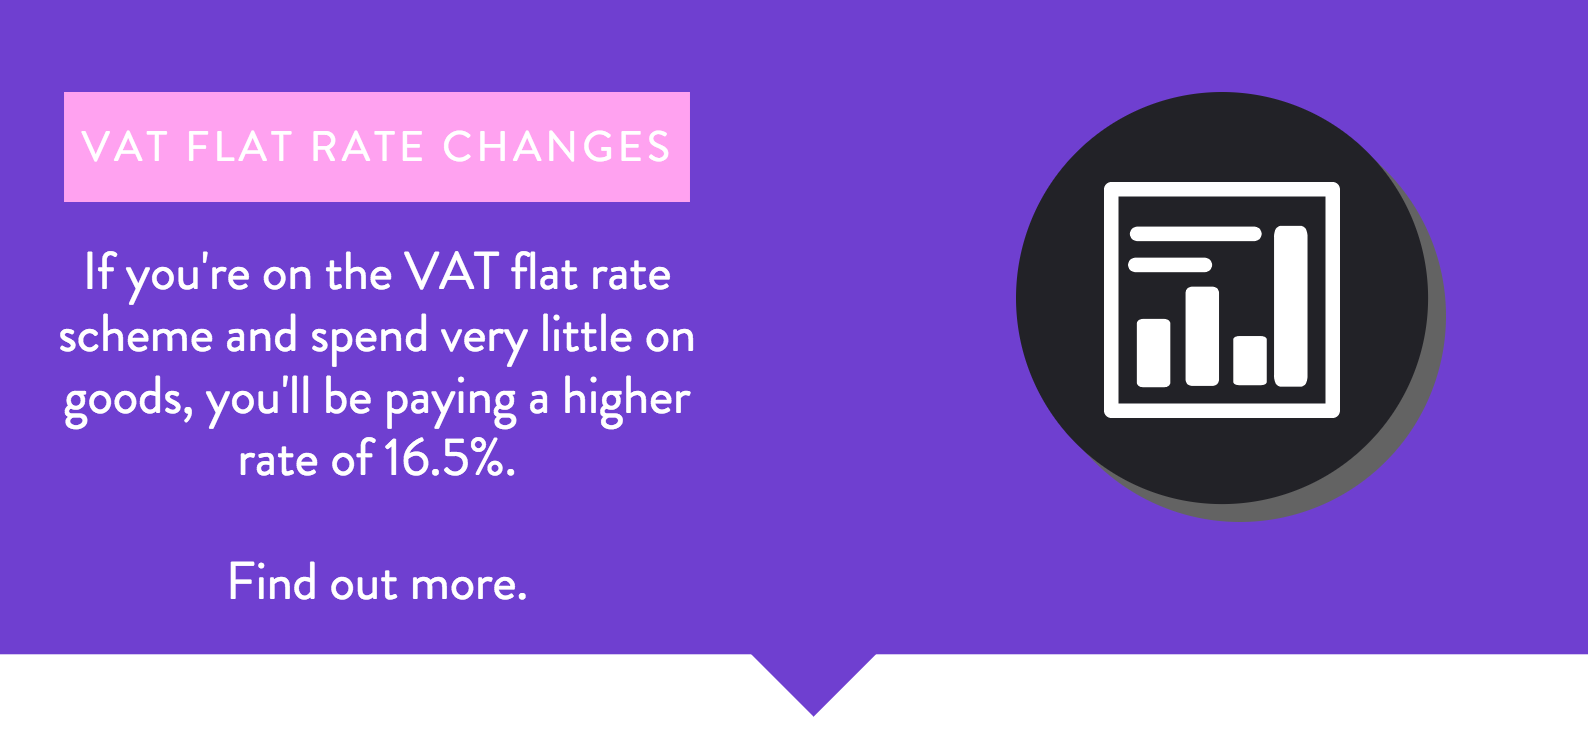 If you are on the VAT flat rate scheme you could be paying a higher rate in the new tax year